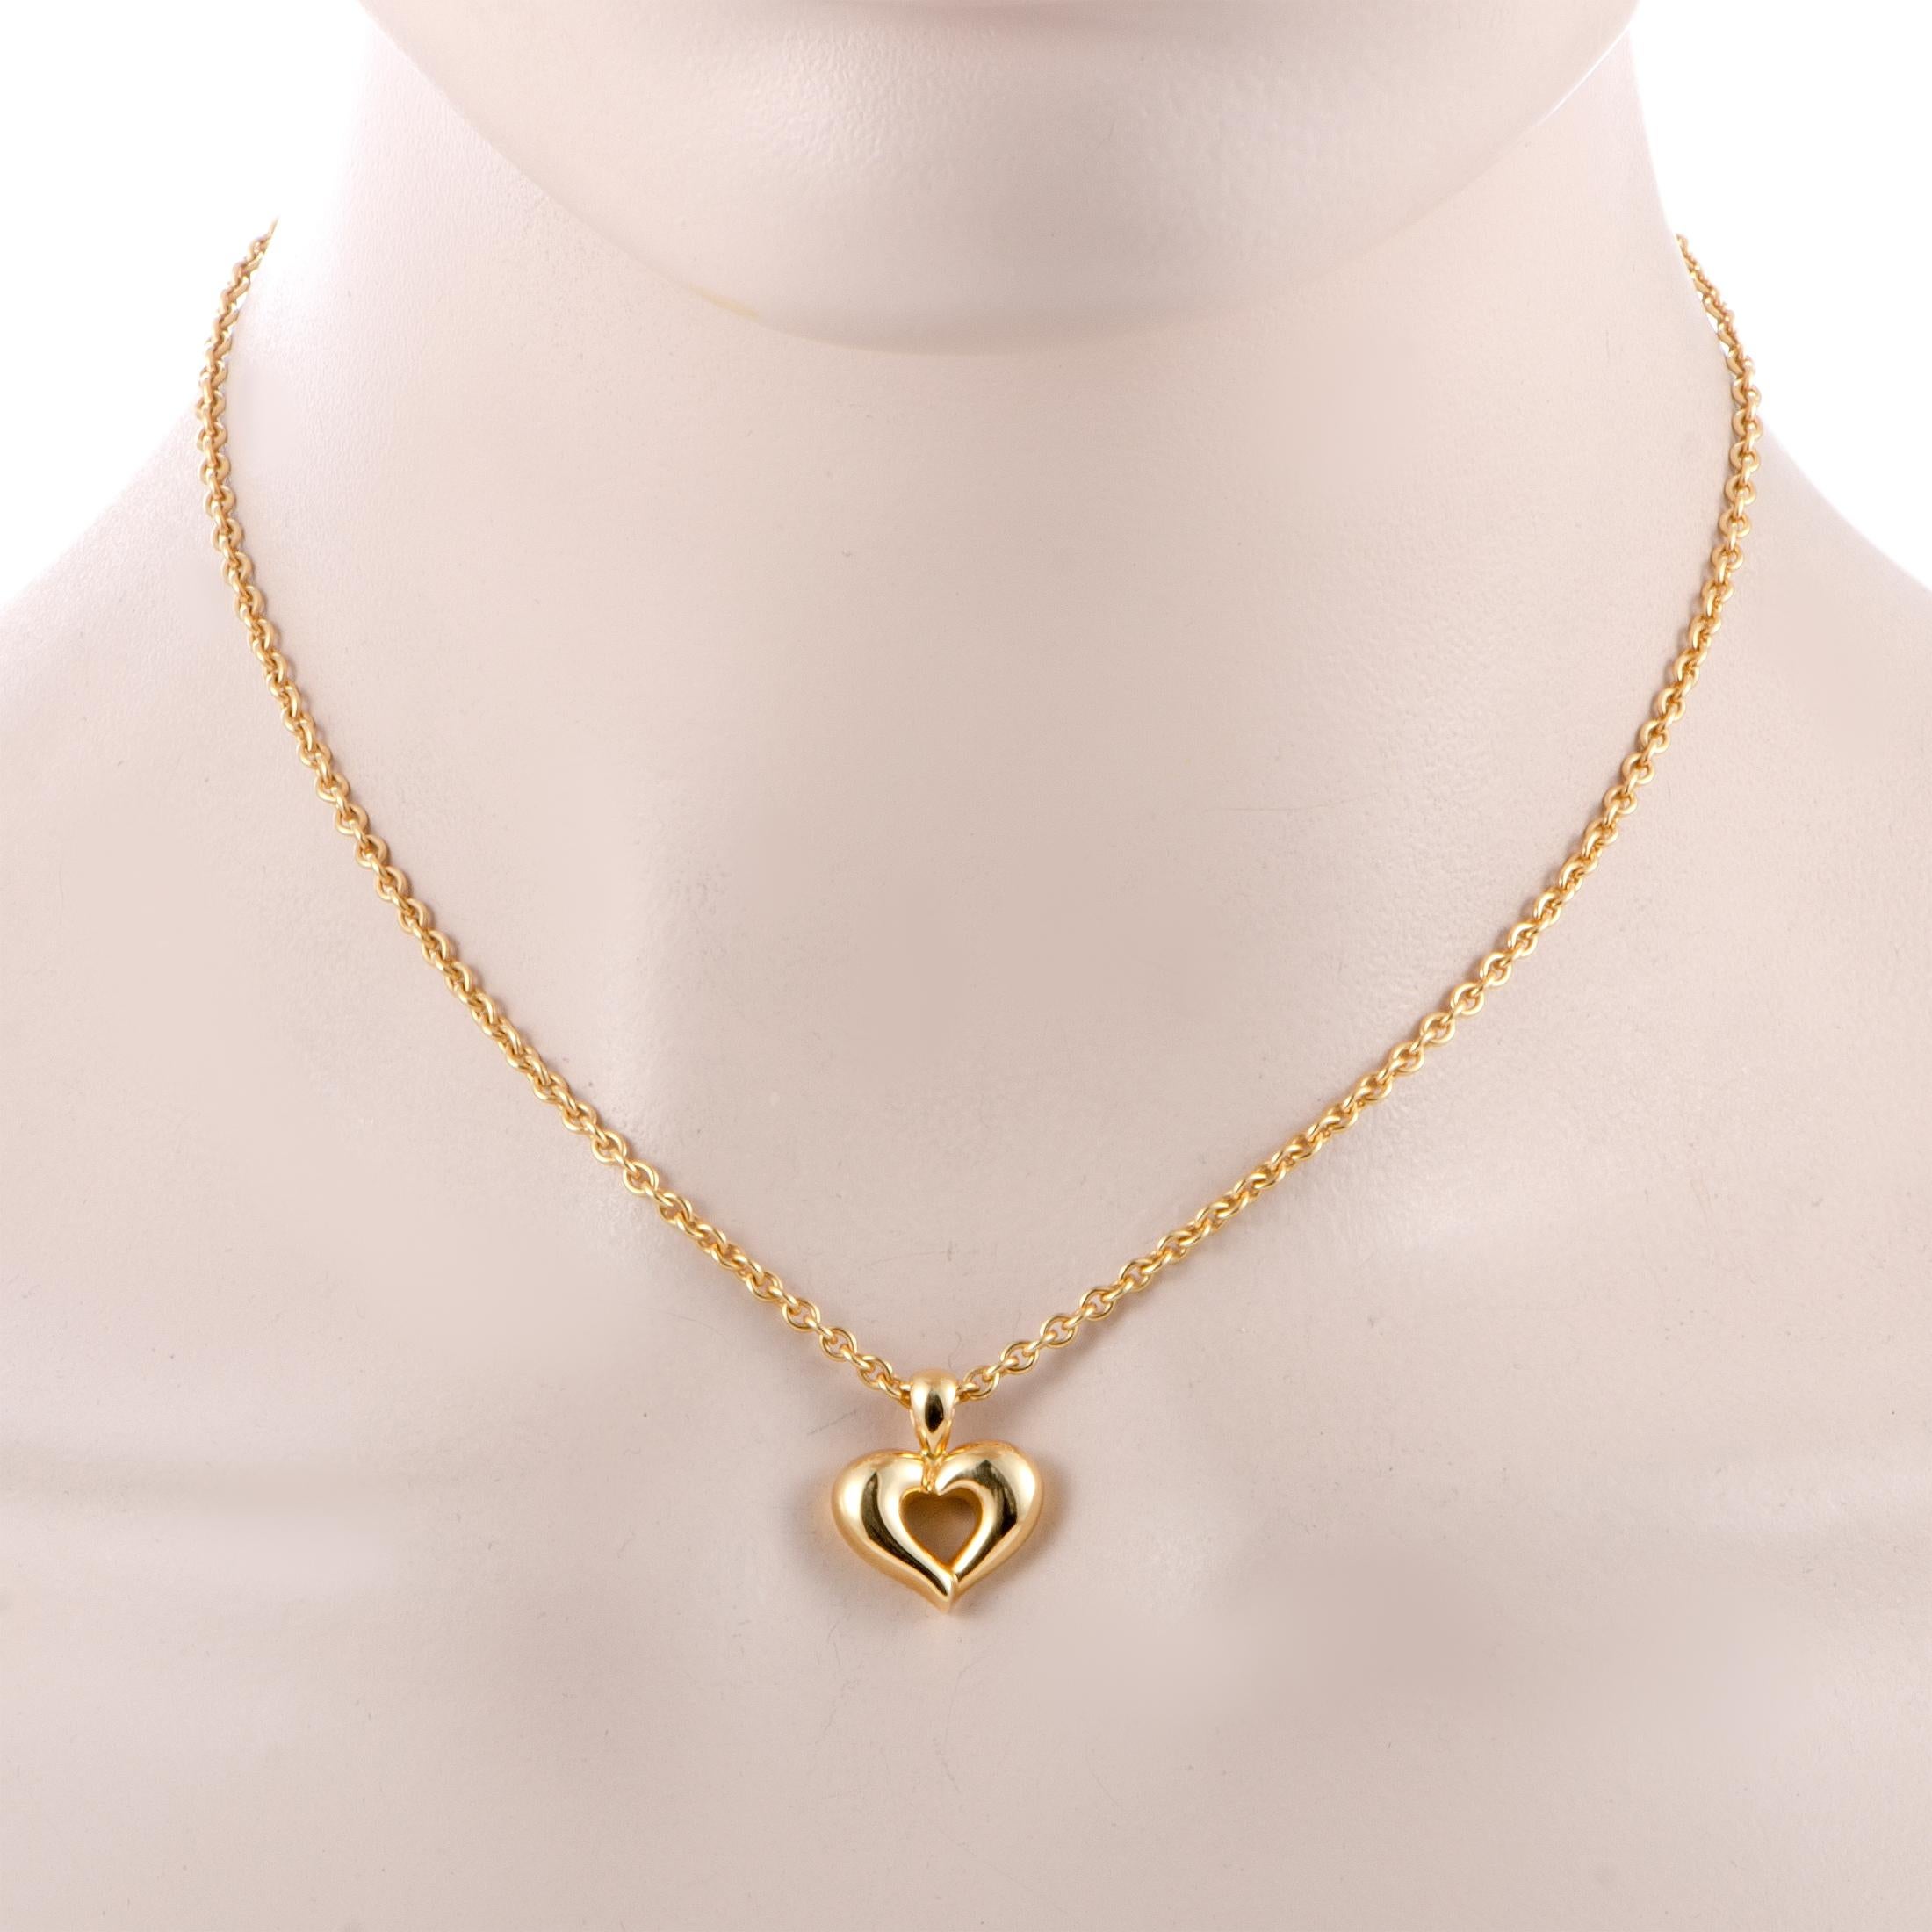 This delightful necklace offers a splendidly feminine appearance, boasting a lovely heart pendant that is presented on a stylish rolo chain. The necklace is designed by Van Cleef & Arpels and it is masterfully crafted from 18K yellow gold, weighing